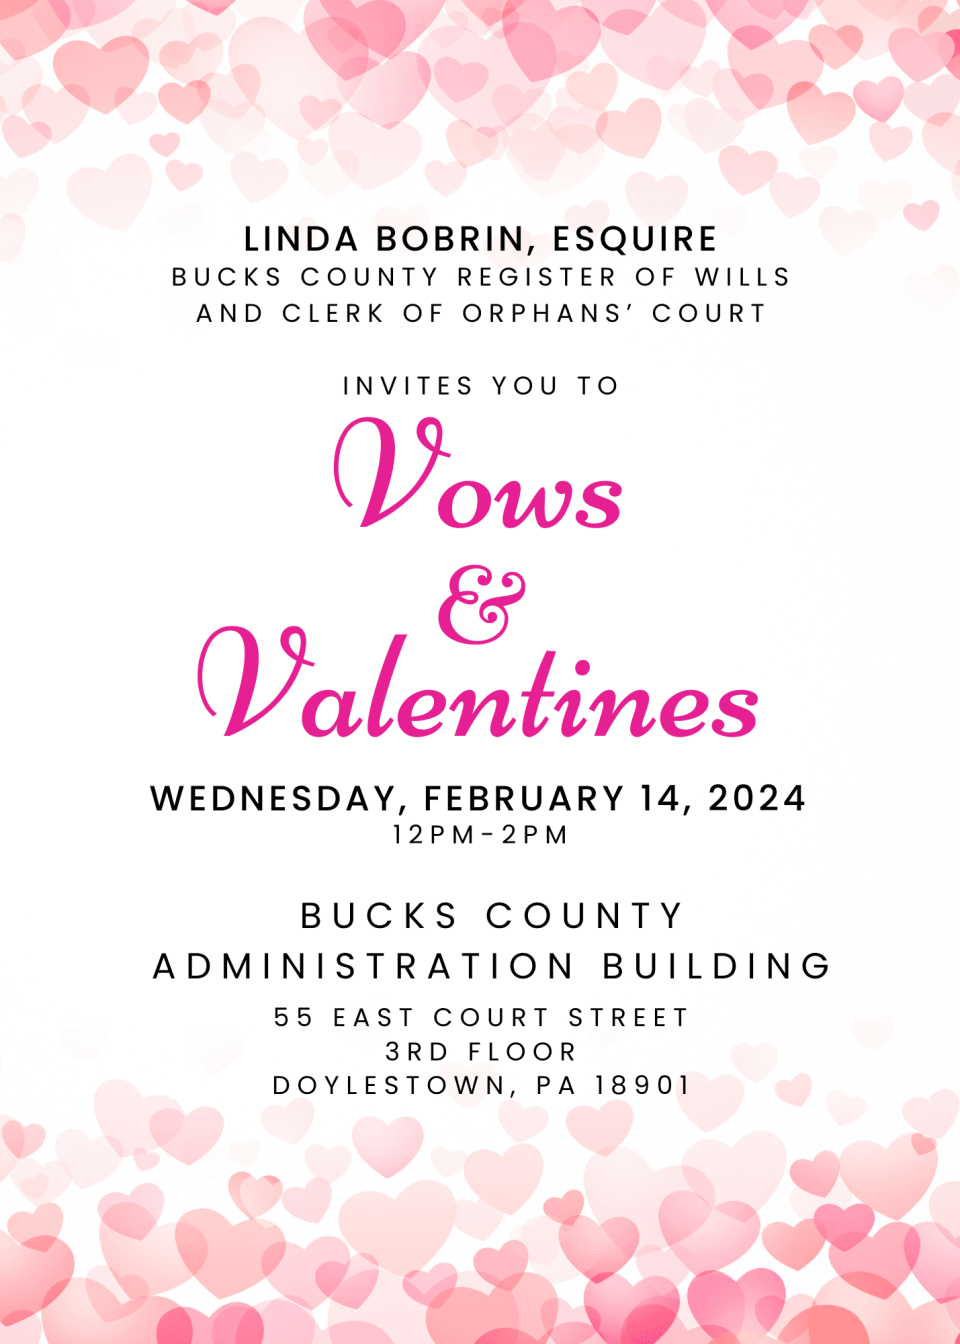 Bucks County Administration will marry Bucks County couples for free on Valentine's Day 2024.